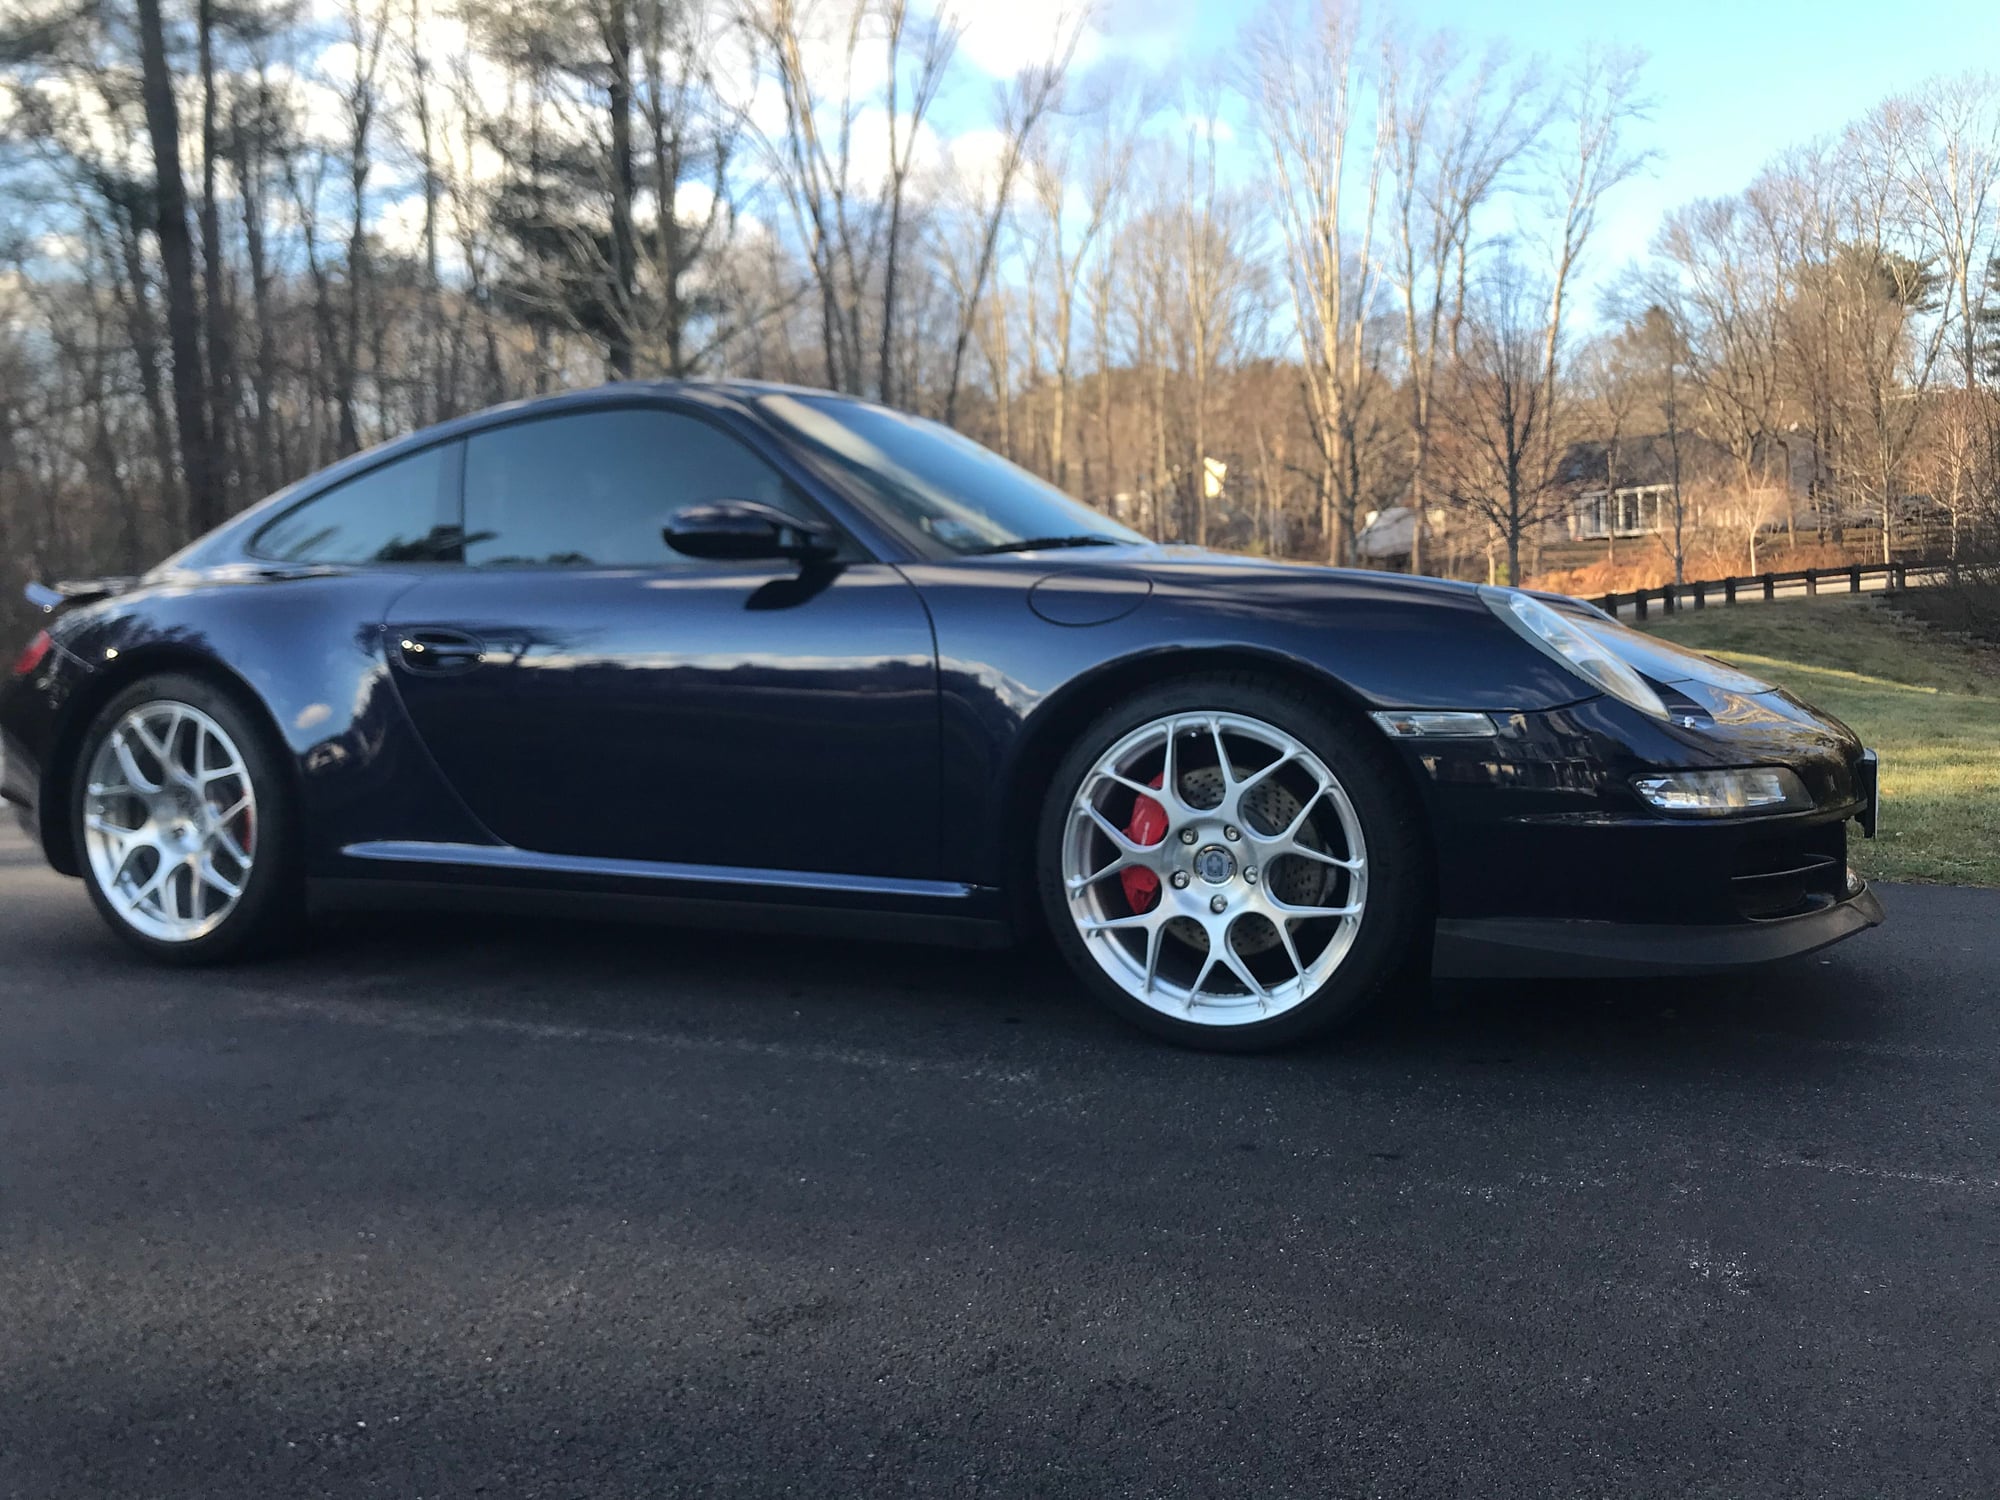 2008 Porsche 911 - 997.1 C4S 6 speed manual - Used - VIN WP0AB29938S732847 - 69,485 Miles - 6 cyl - AWD - Manual - Coupe - Blue - Boston, MA 02210, United States